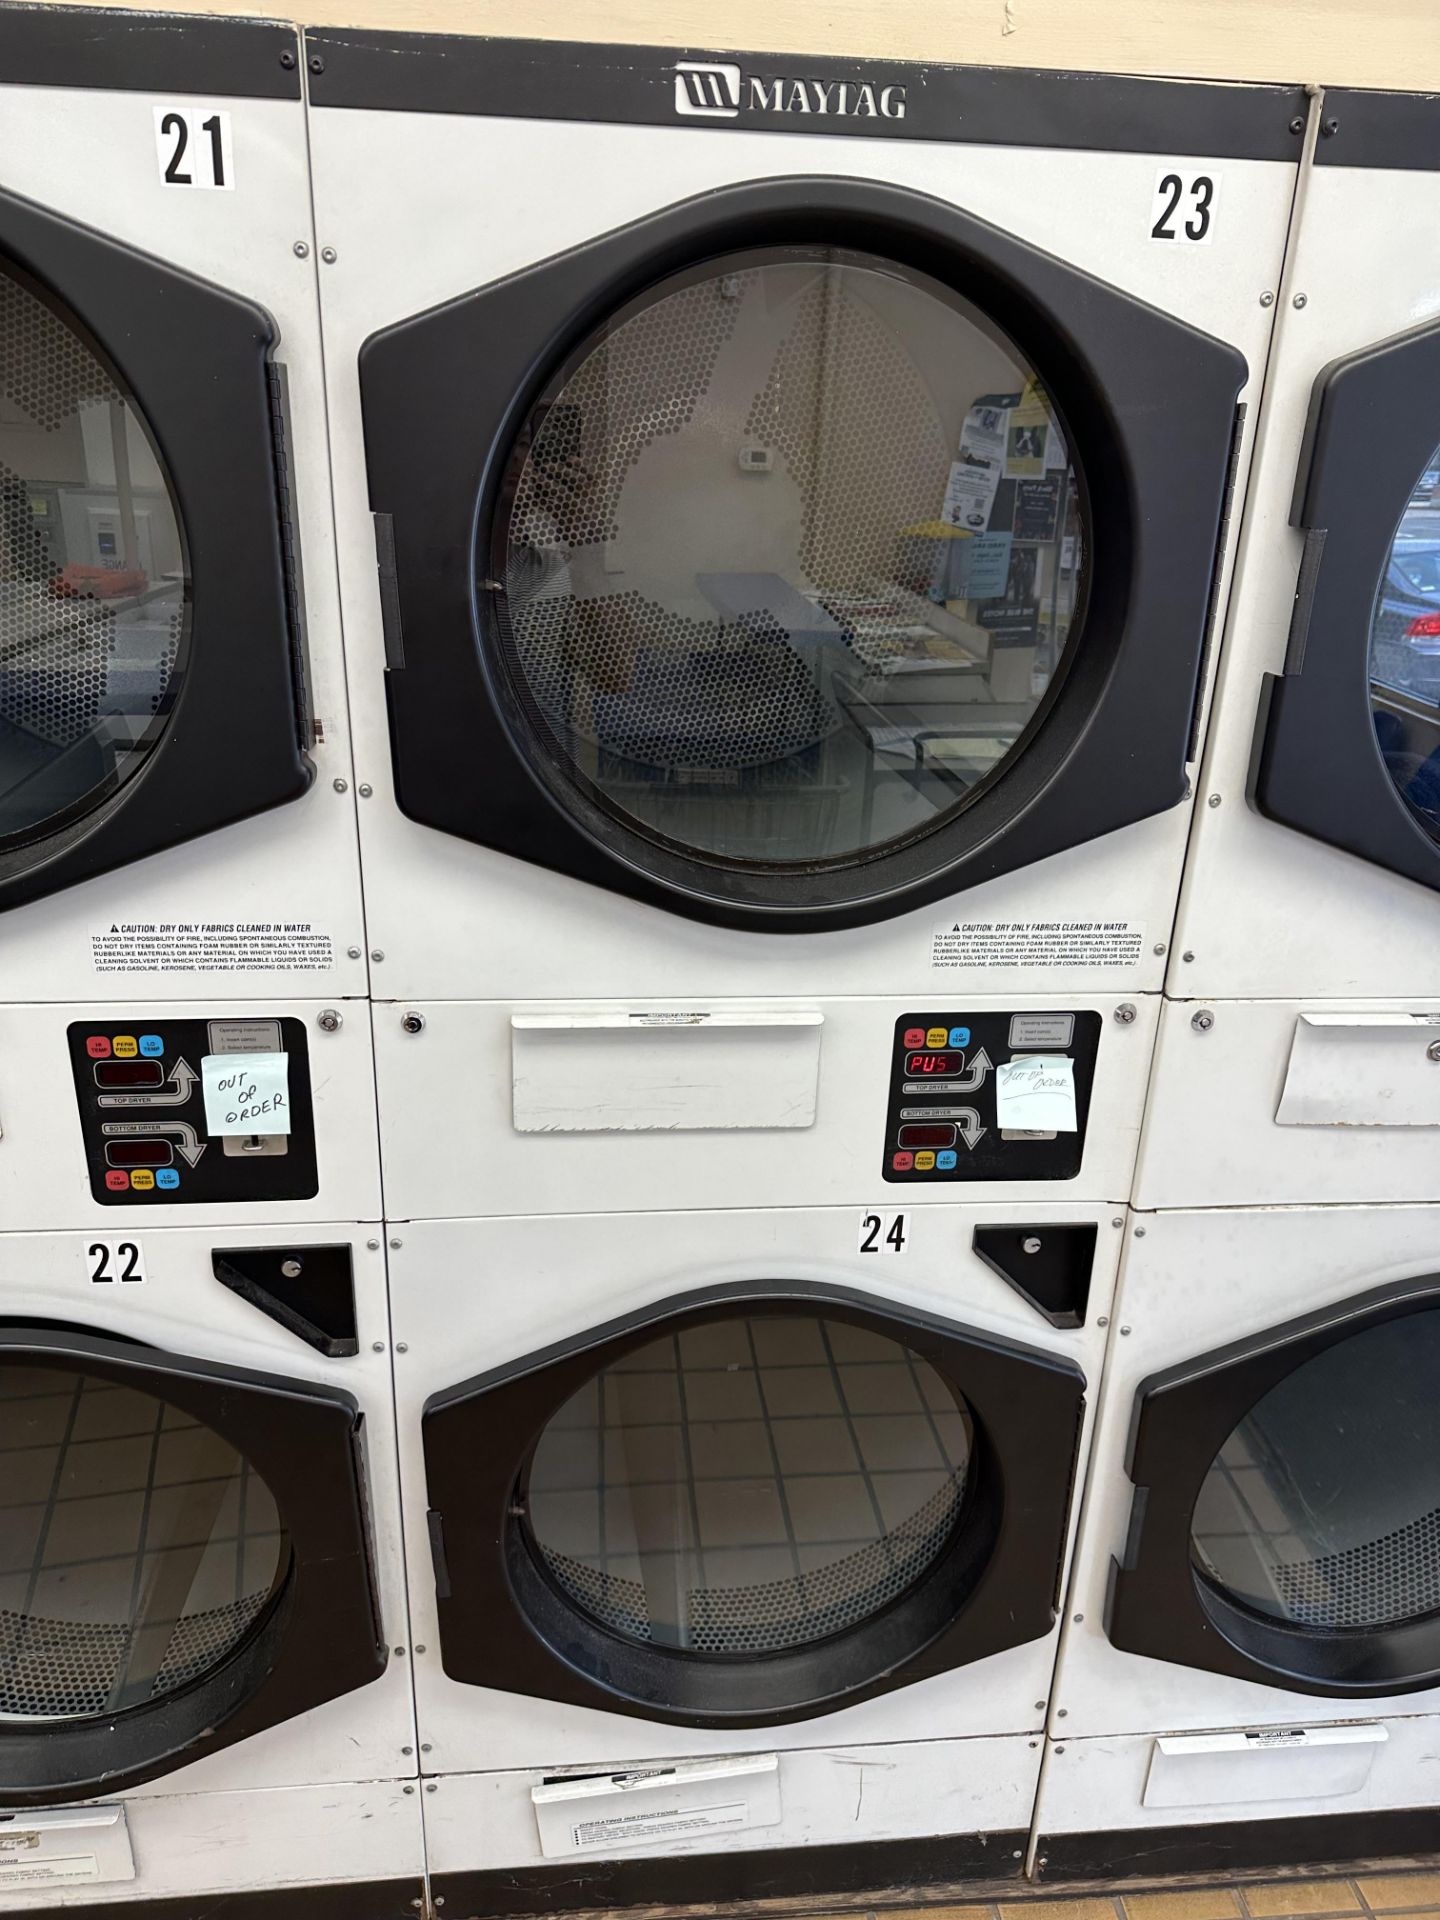 (2) Maytag Stacked Gas Commercial Dryers - Coin Operated w/Digital Readout - Model & Serials All N/